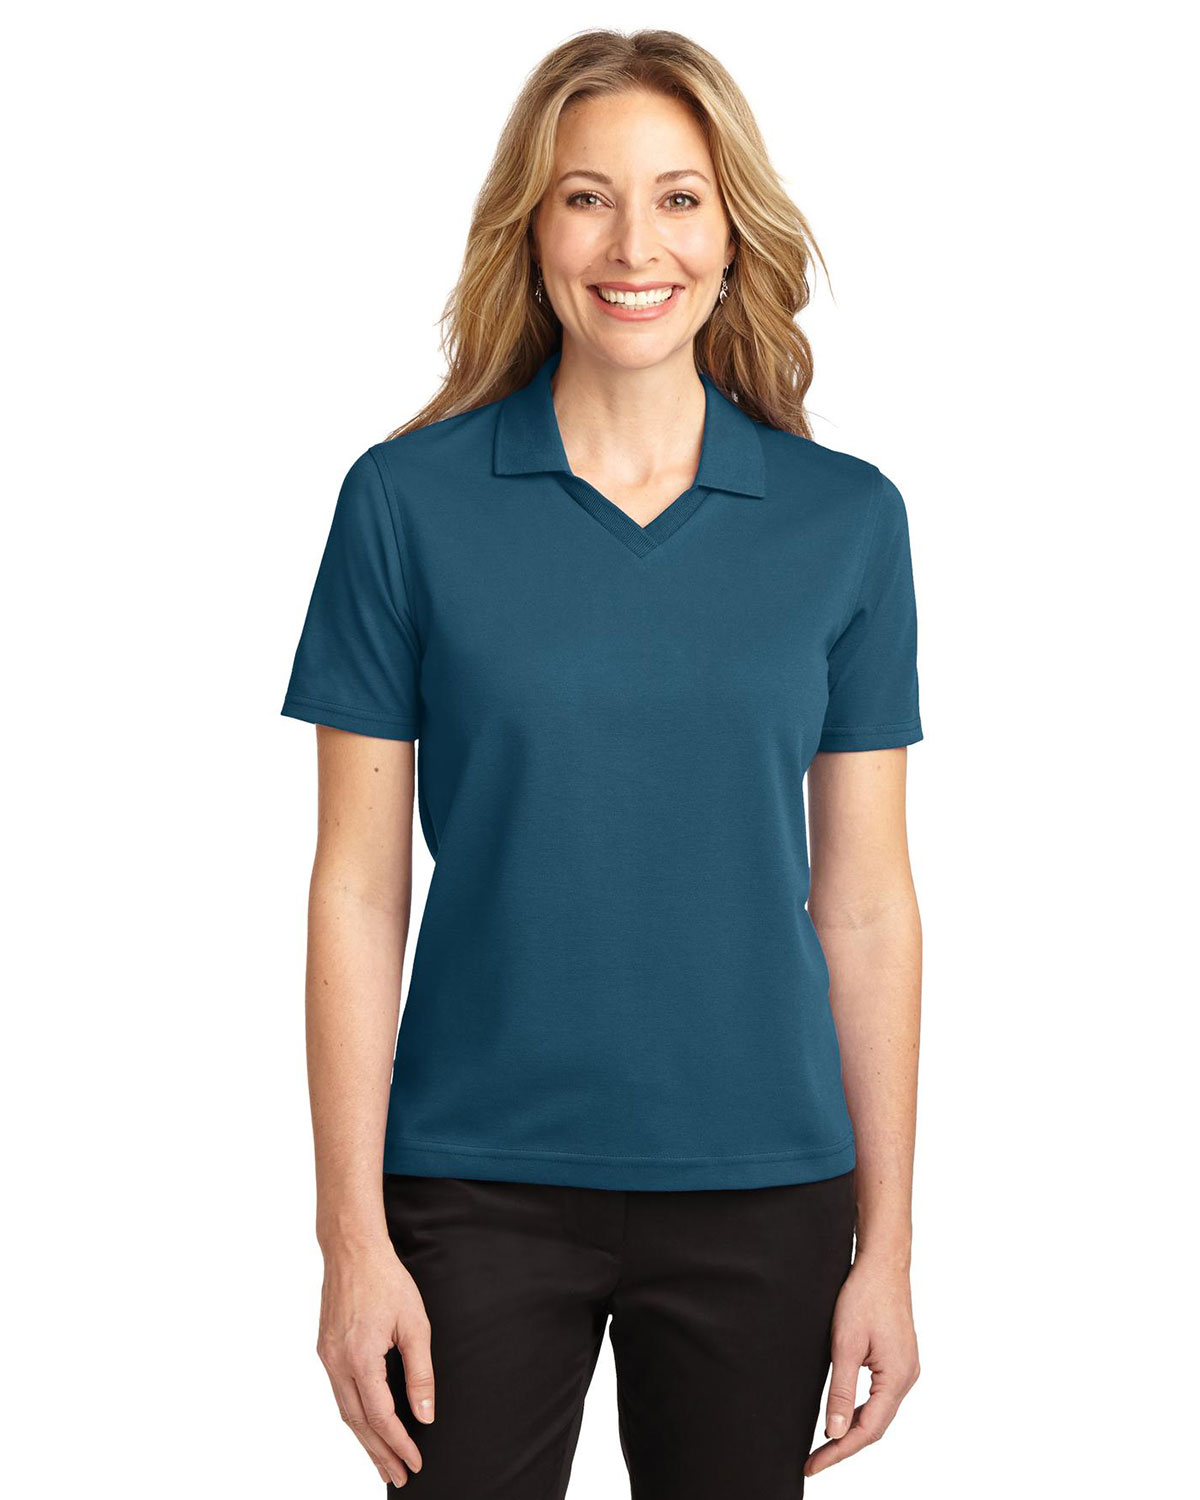 Port Authority L455 Women Rapid Dry Polo at Apparelstation